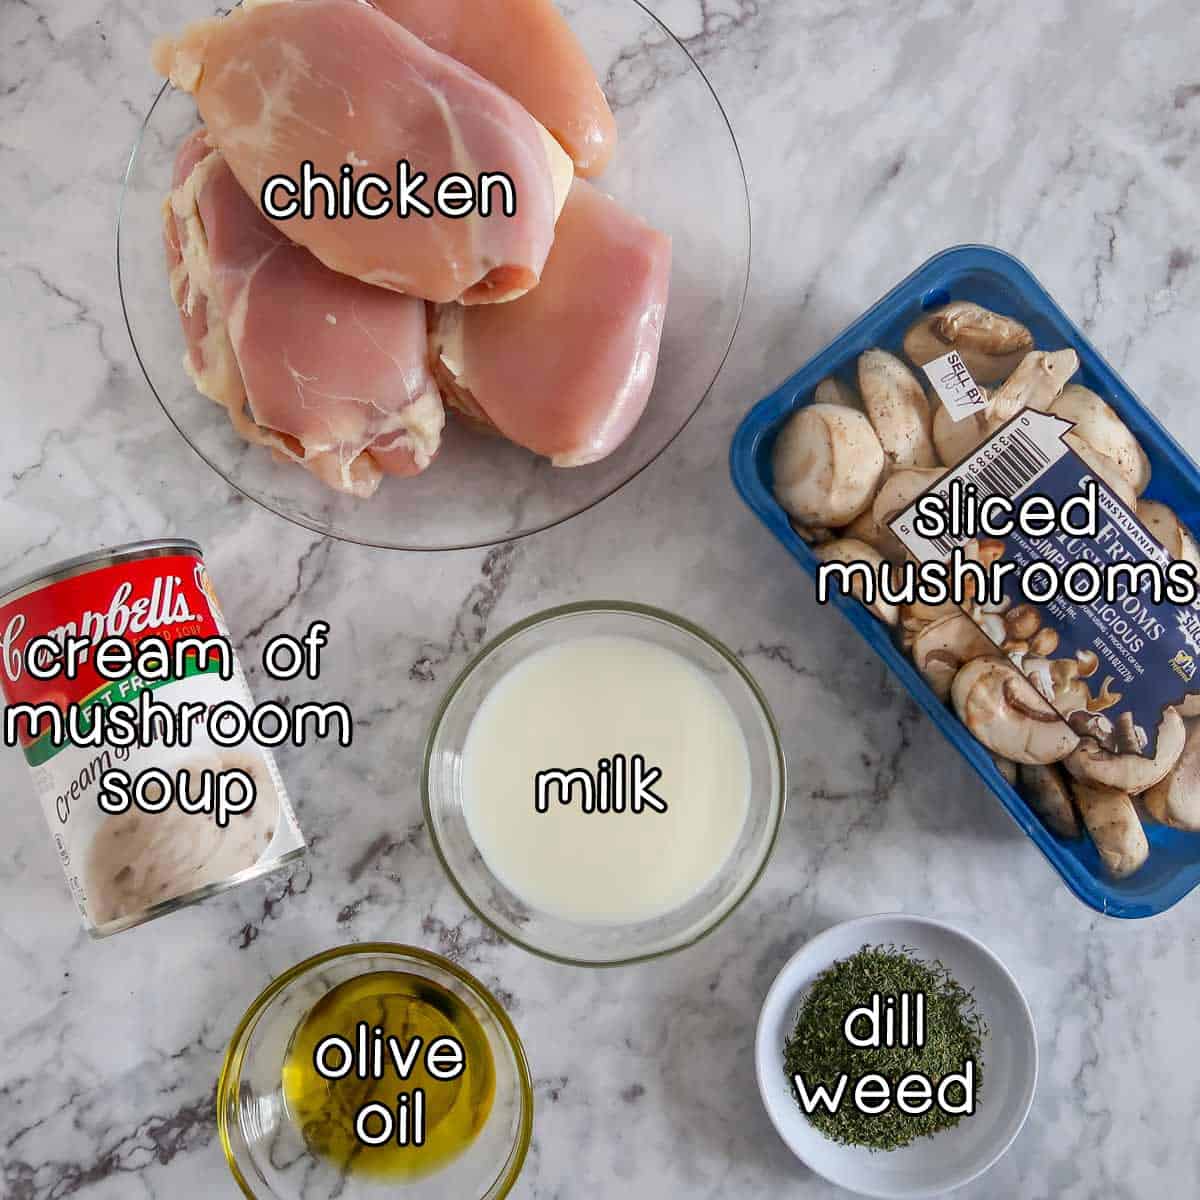 Overhead shot of main ingredients- chicken, sliced mushrooms, cream of mushroom soup, milk, olive oil, and dill weed.